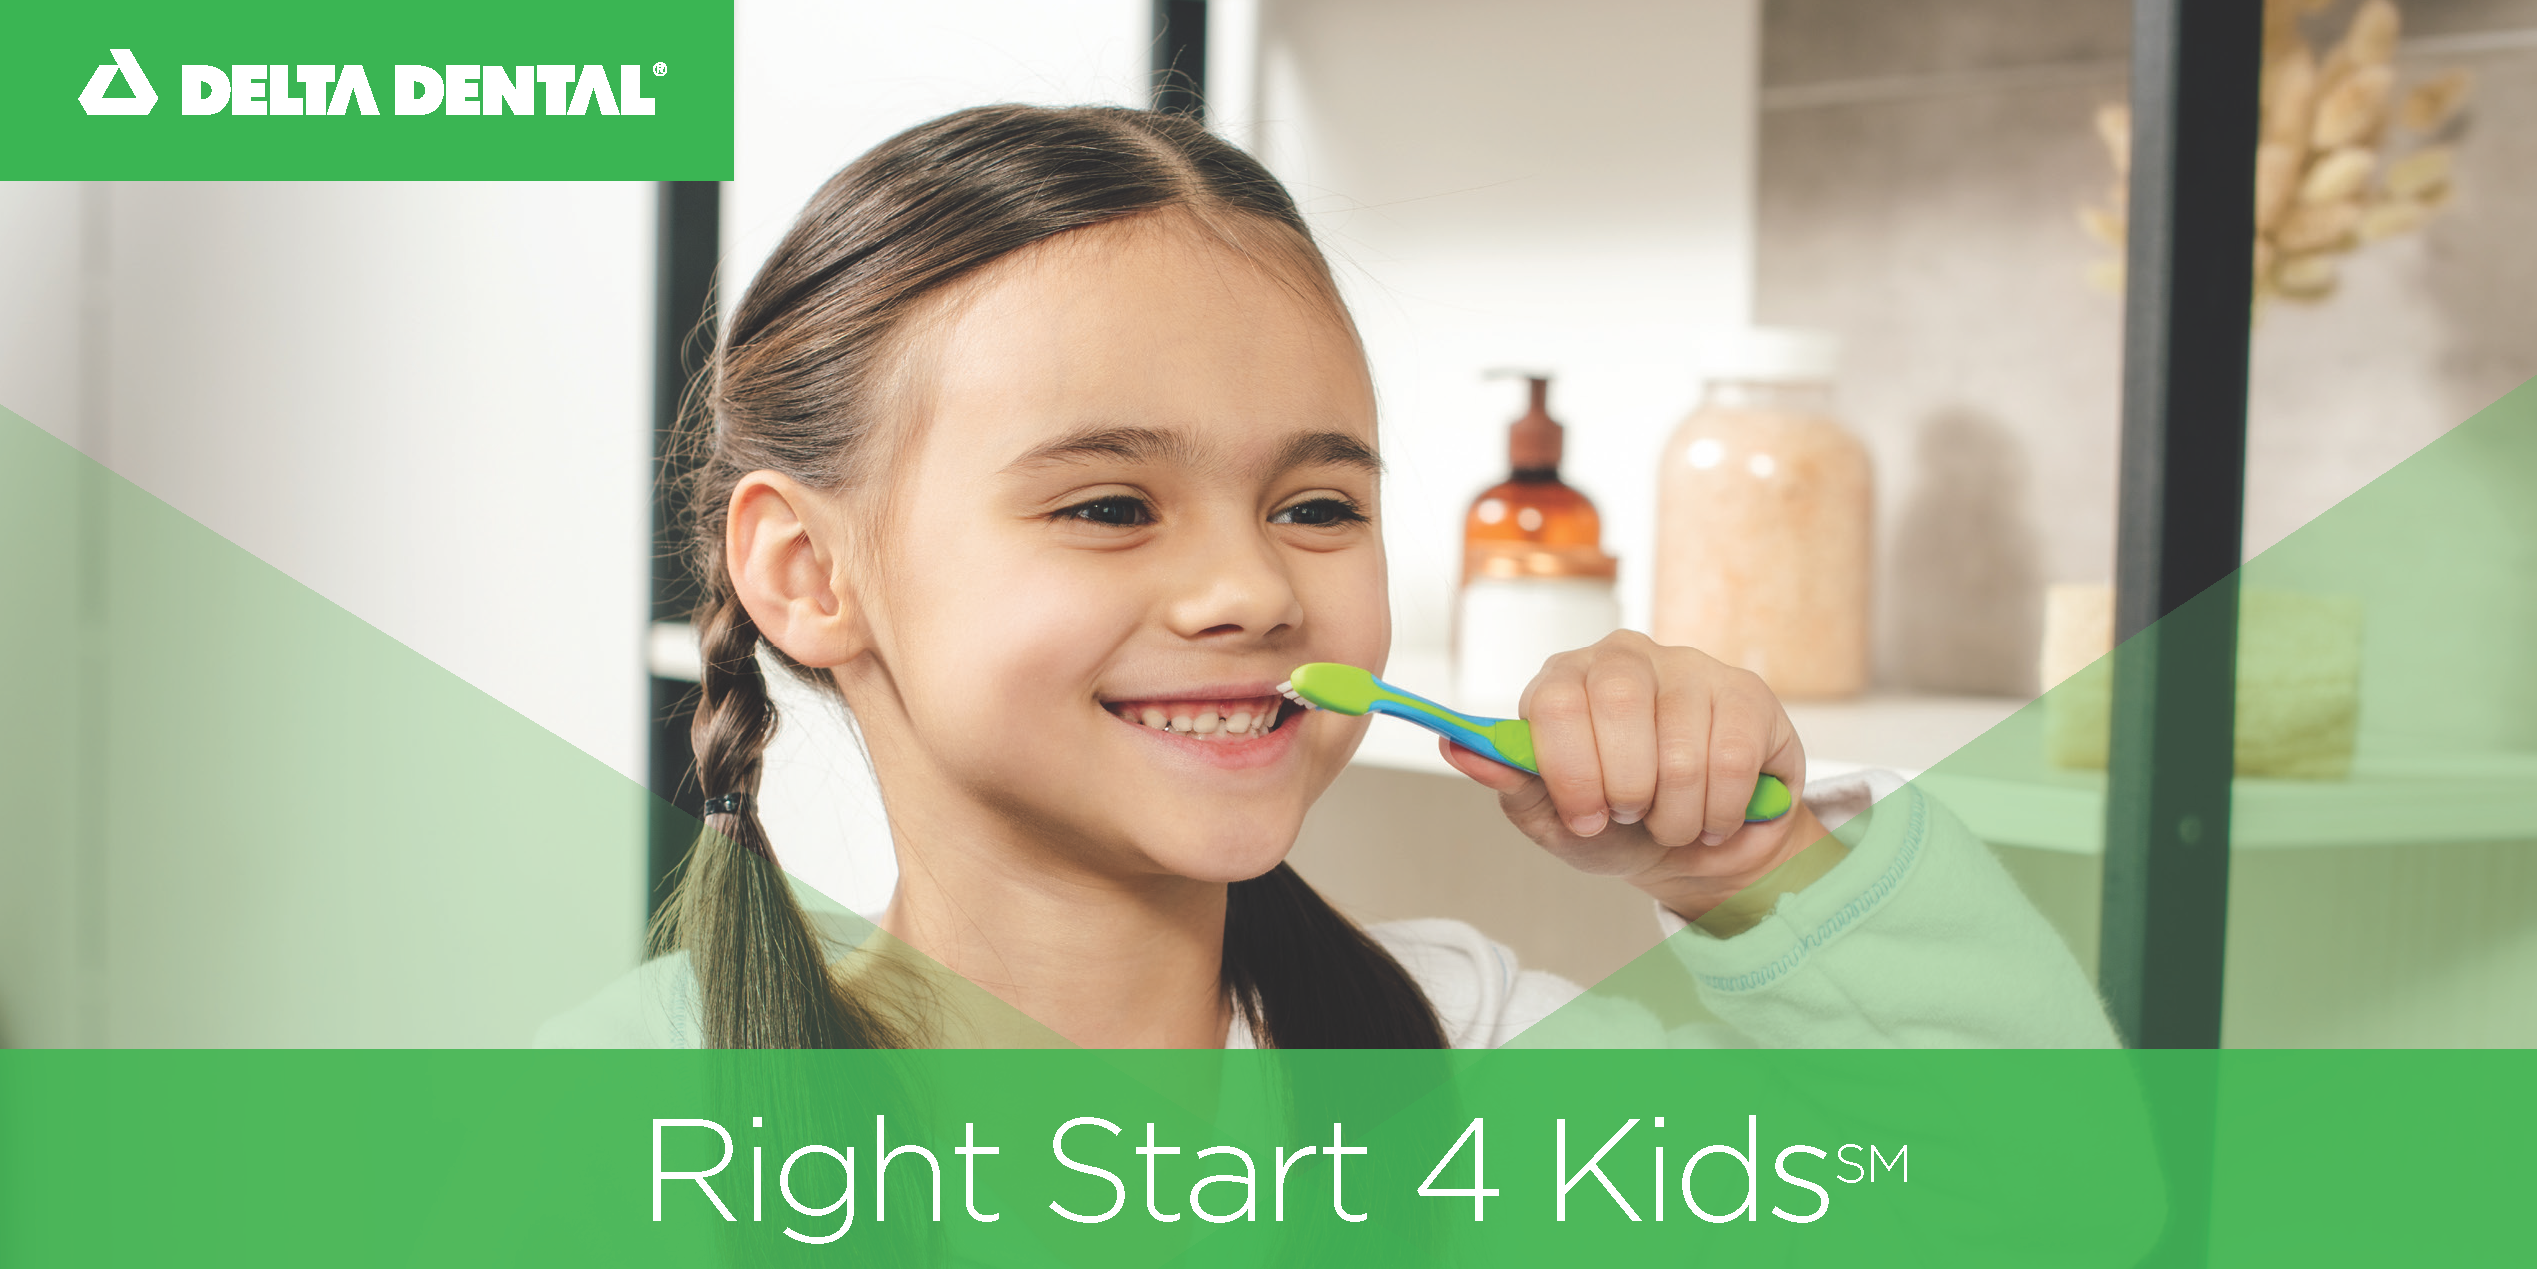 Top portion of the Right Start 4 Kids promotional flyer